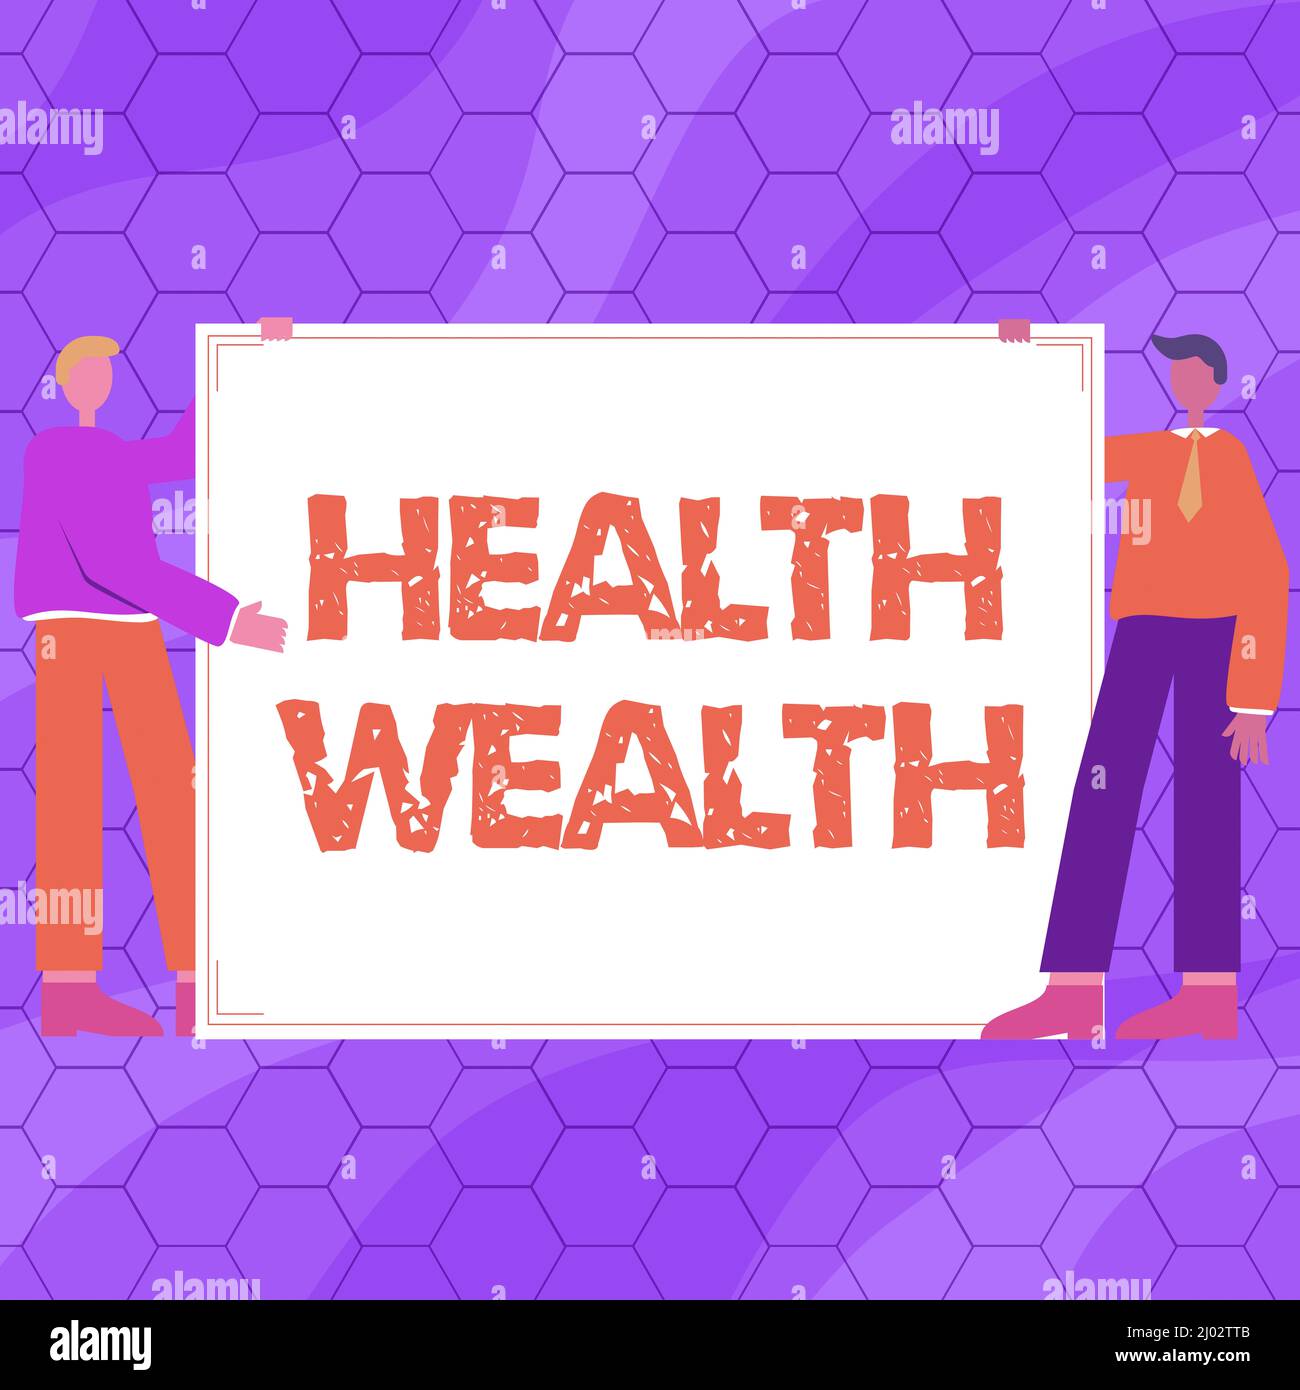 Health Better Than Wealth Stock Vector (Royalty Free) 250951570 |  Shutterstock